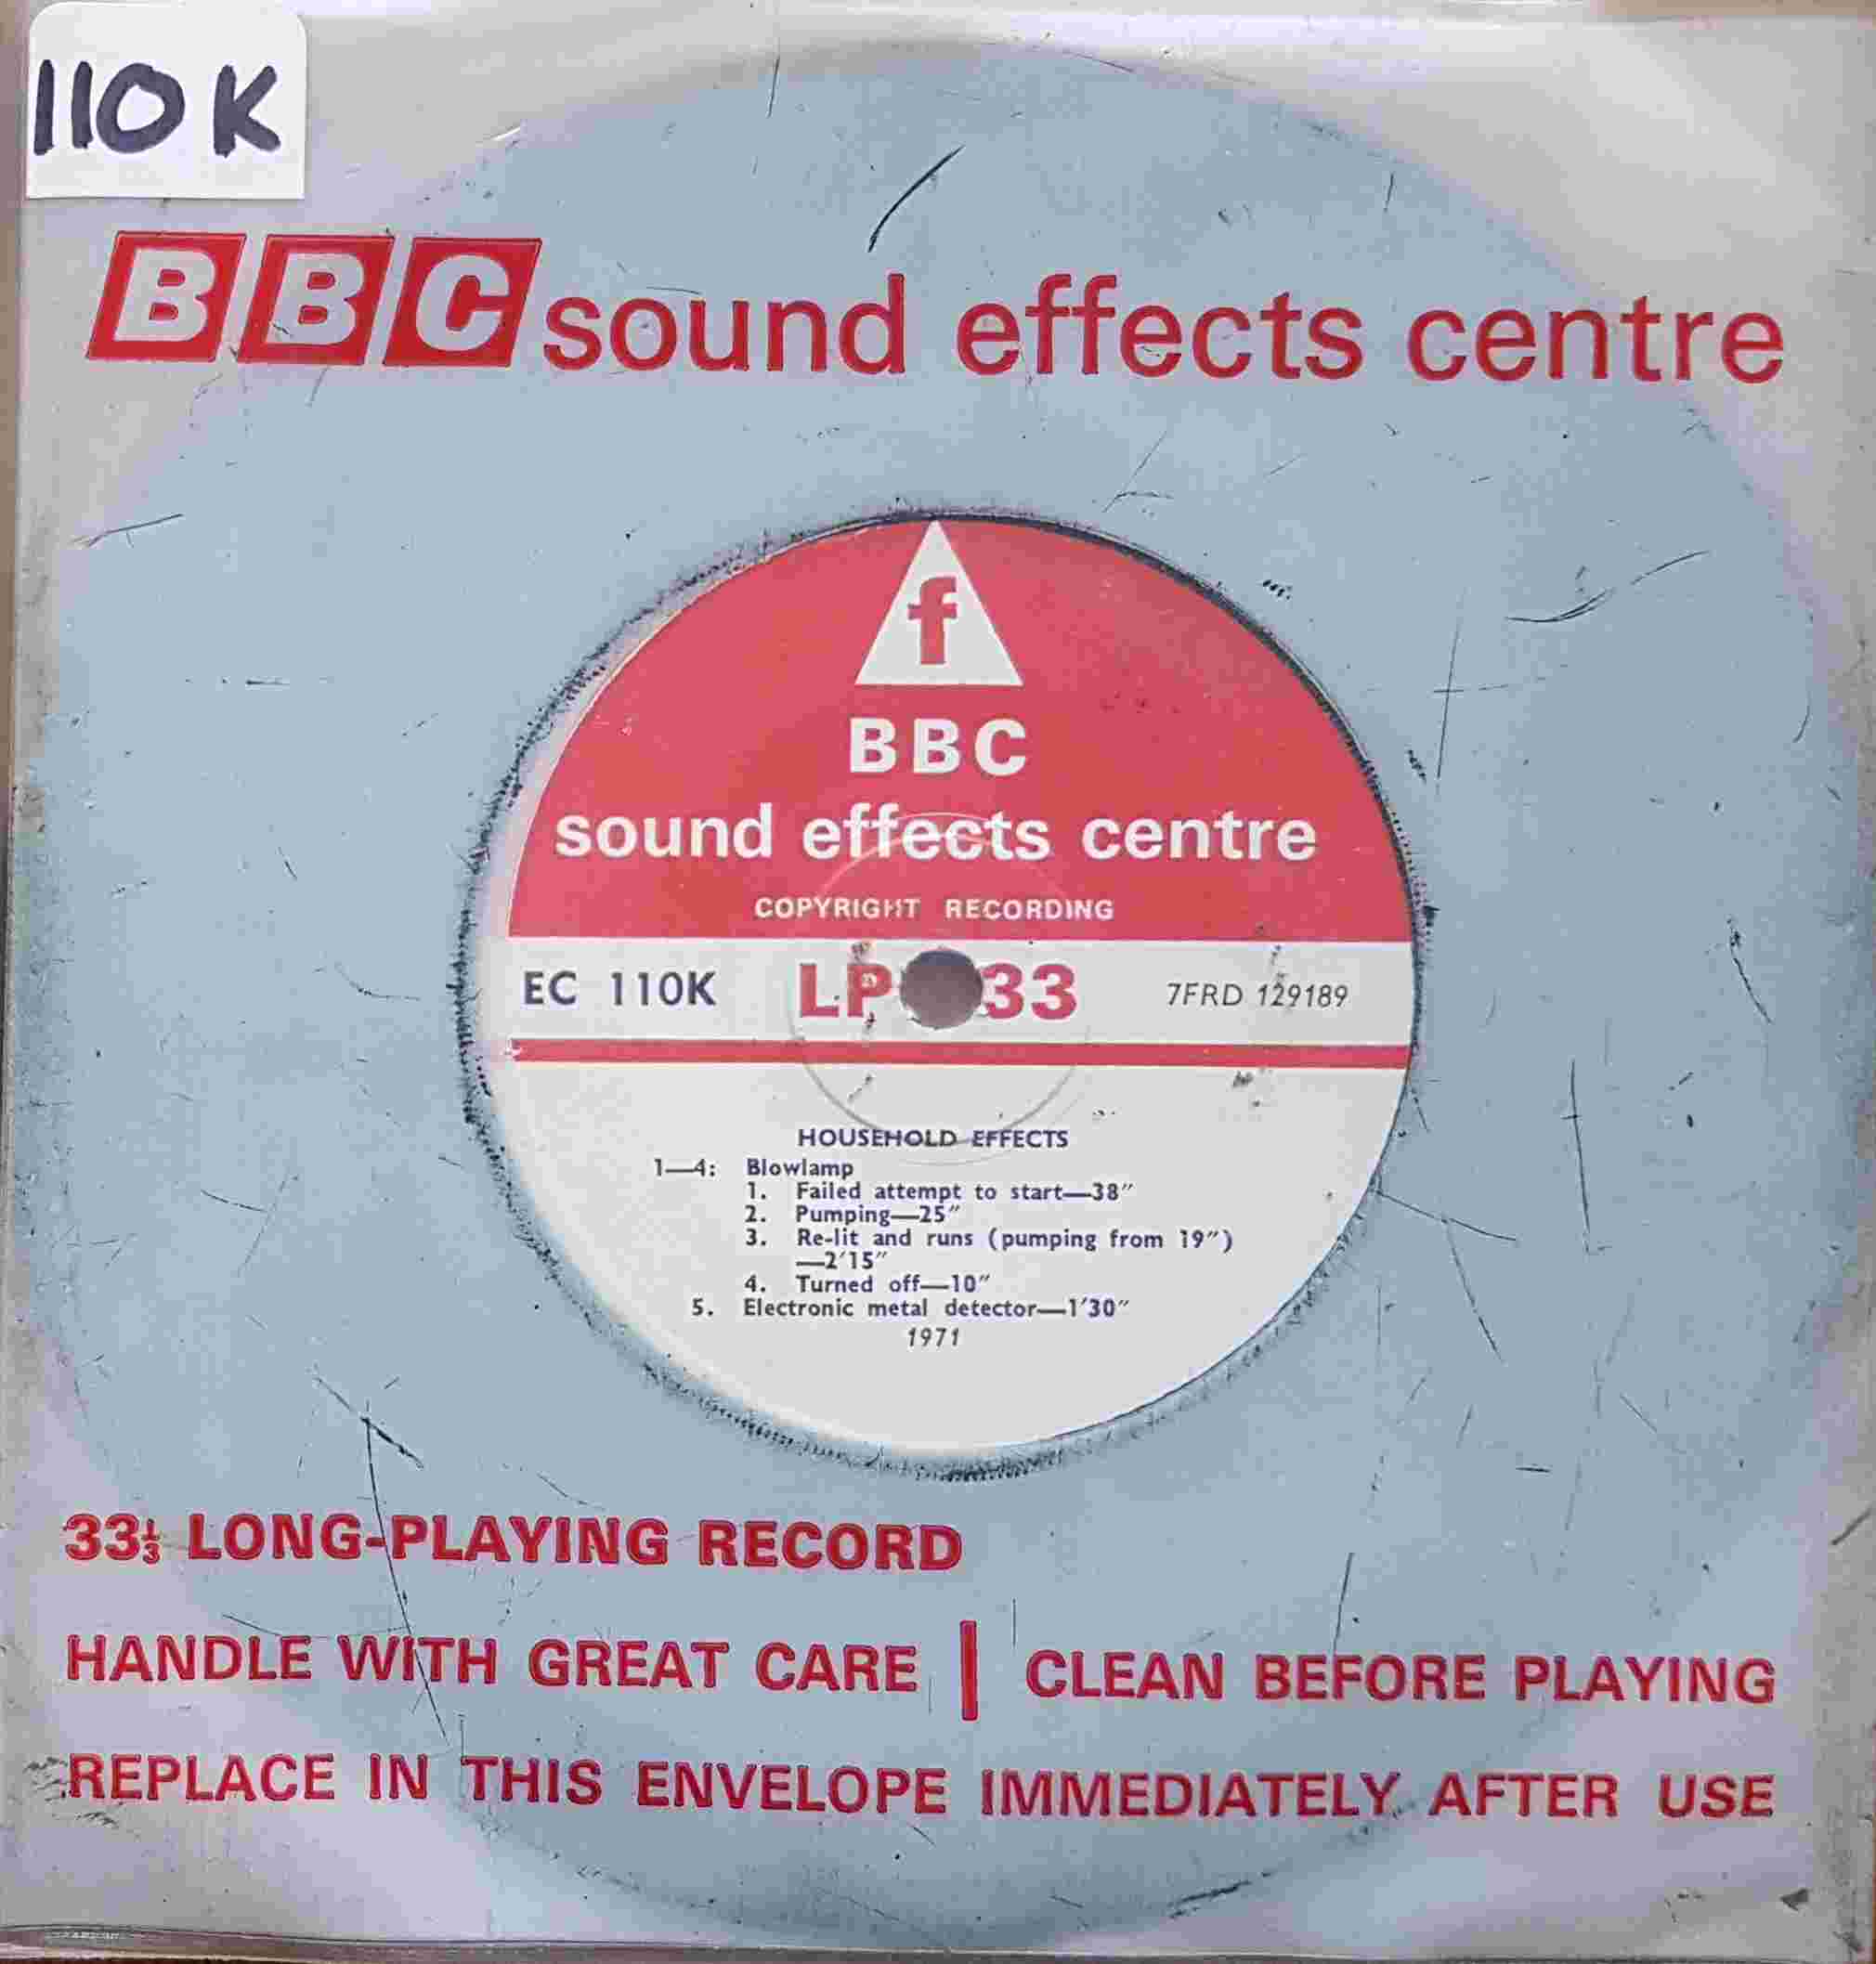 Picture of EC 110K Household effects by artist Not registered from the BBC records and Tapes library